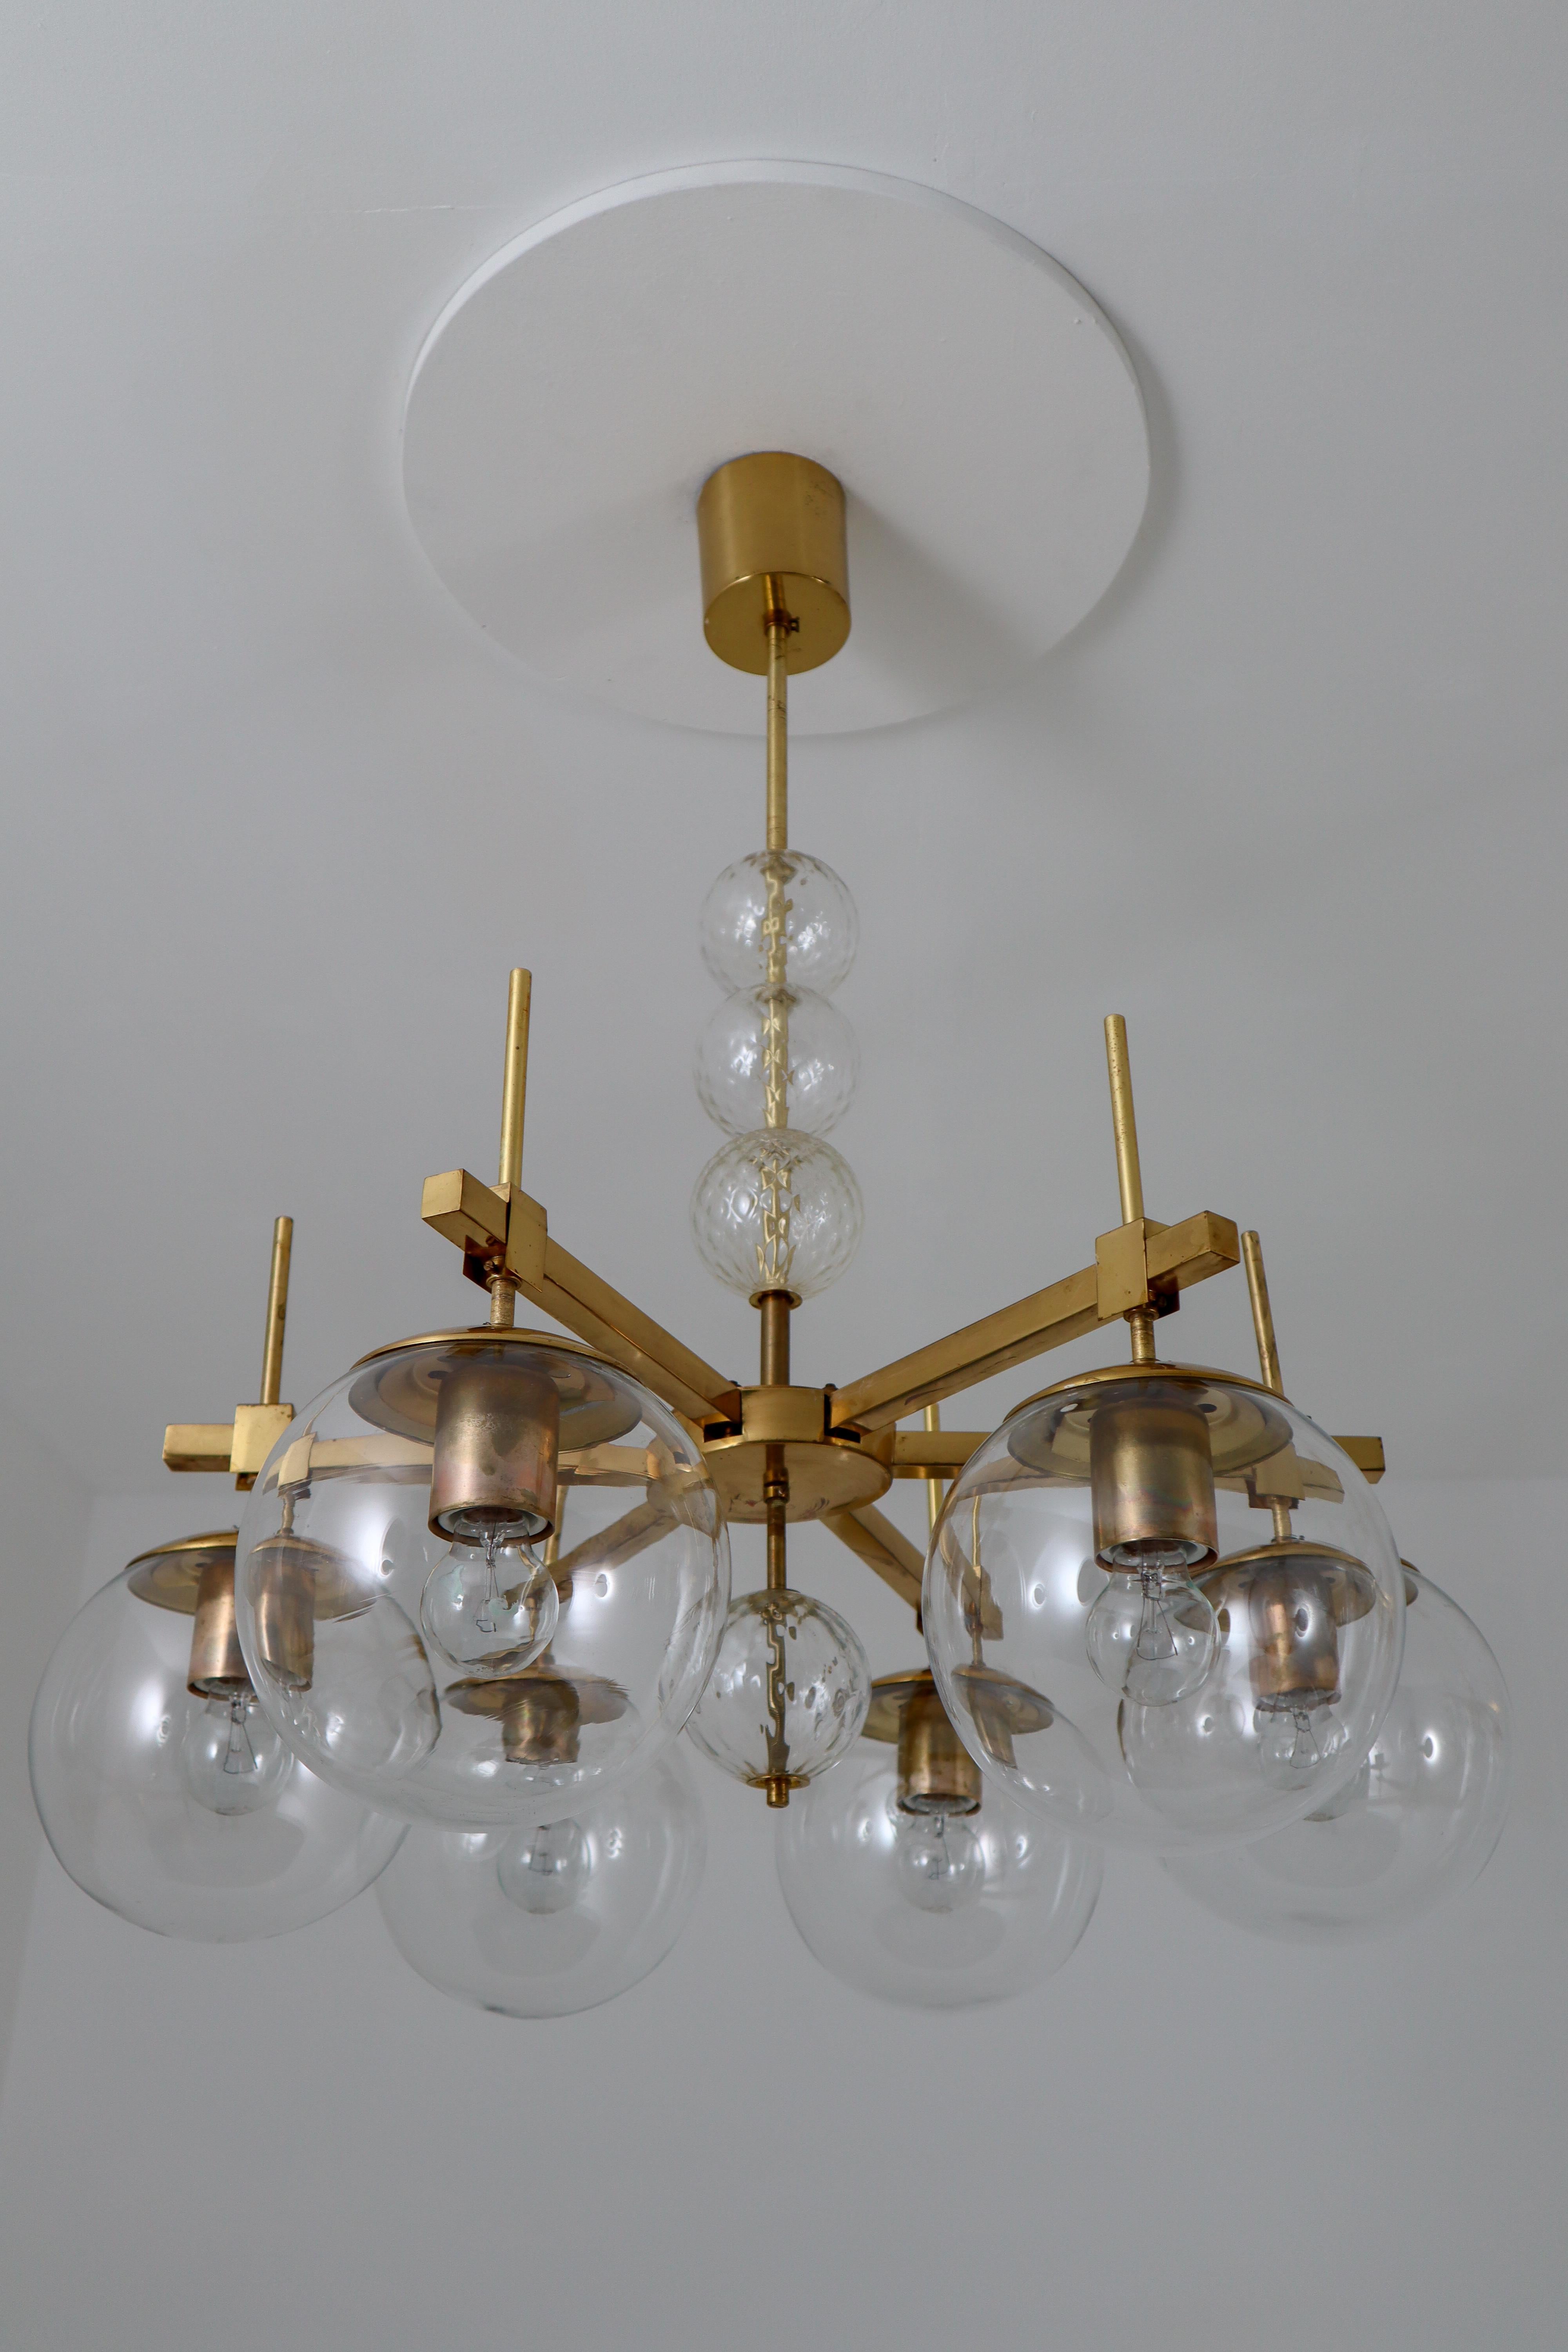 Set of three brass chandeliers was produced in Europe in the 1960s. A spirited and chic design set chandeliers with brass fixture and hand blown glass. The chandelier with brass frame consist of six lights, formed in a circle, with glass shades. The